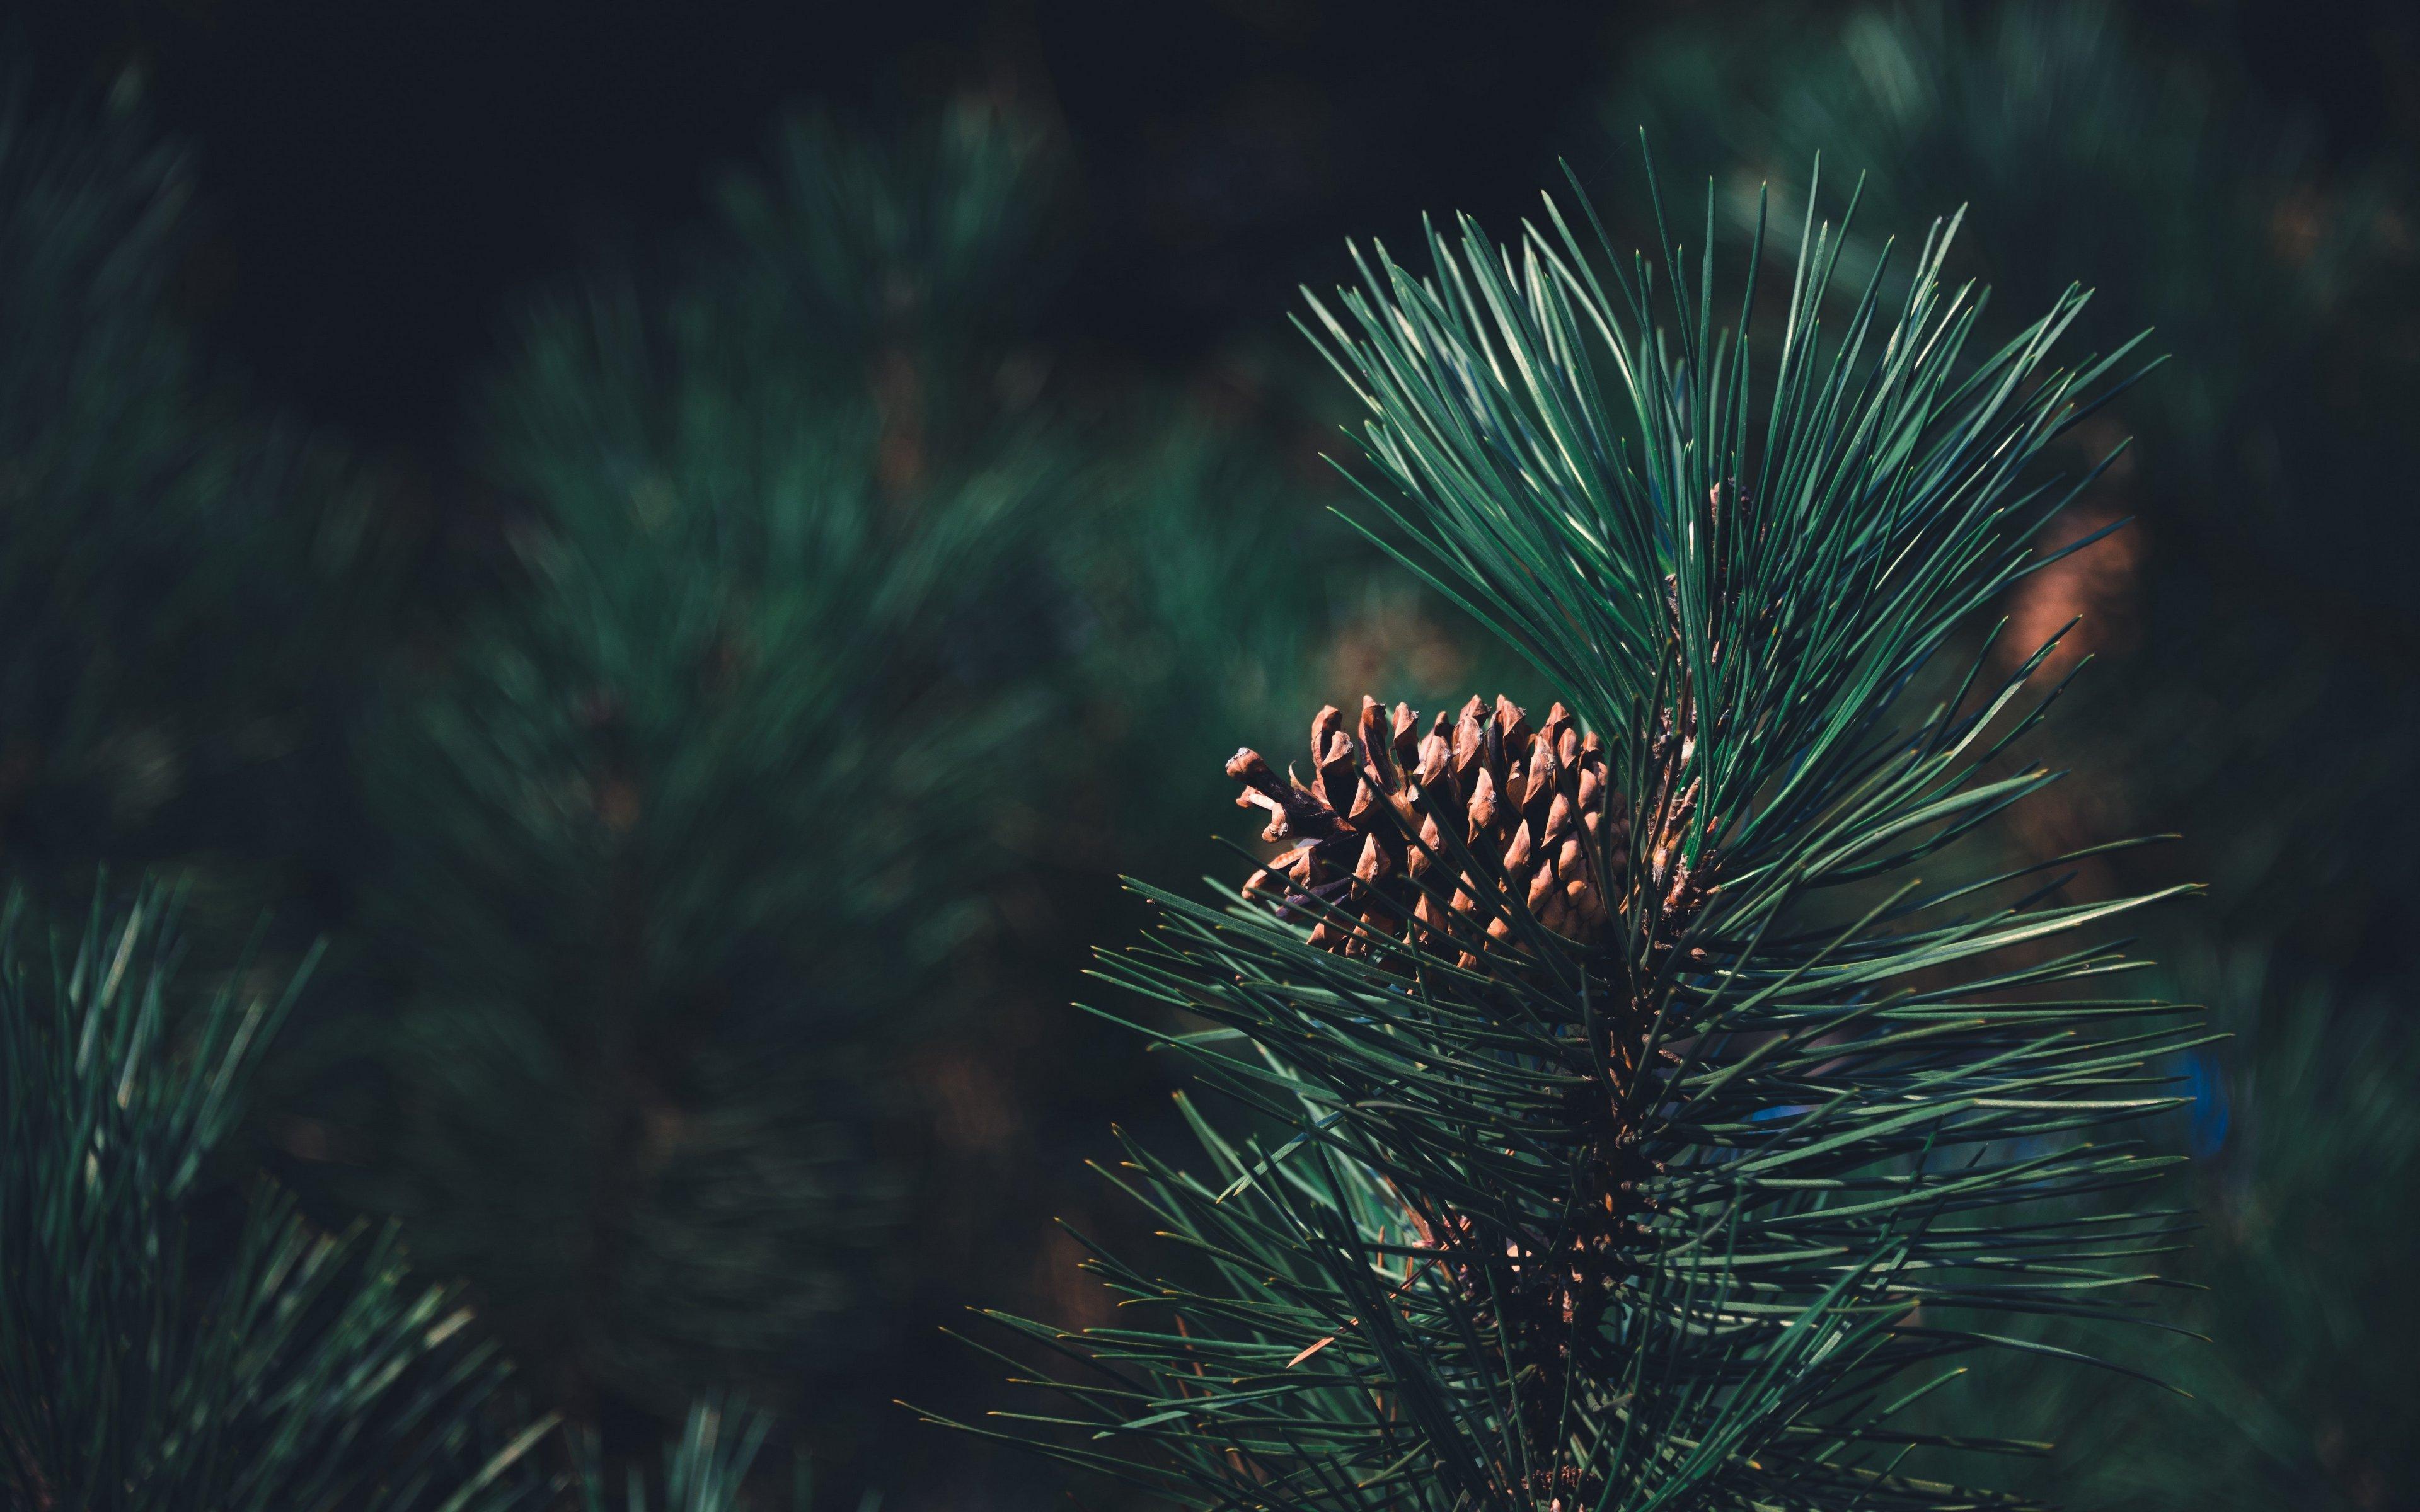 pine 4K wallpaper for your desktop or mobile screen free and easy